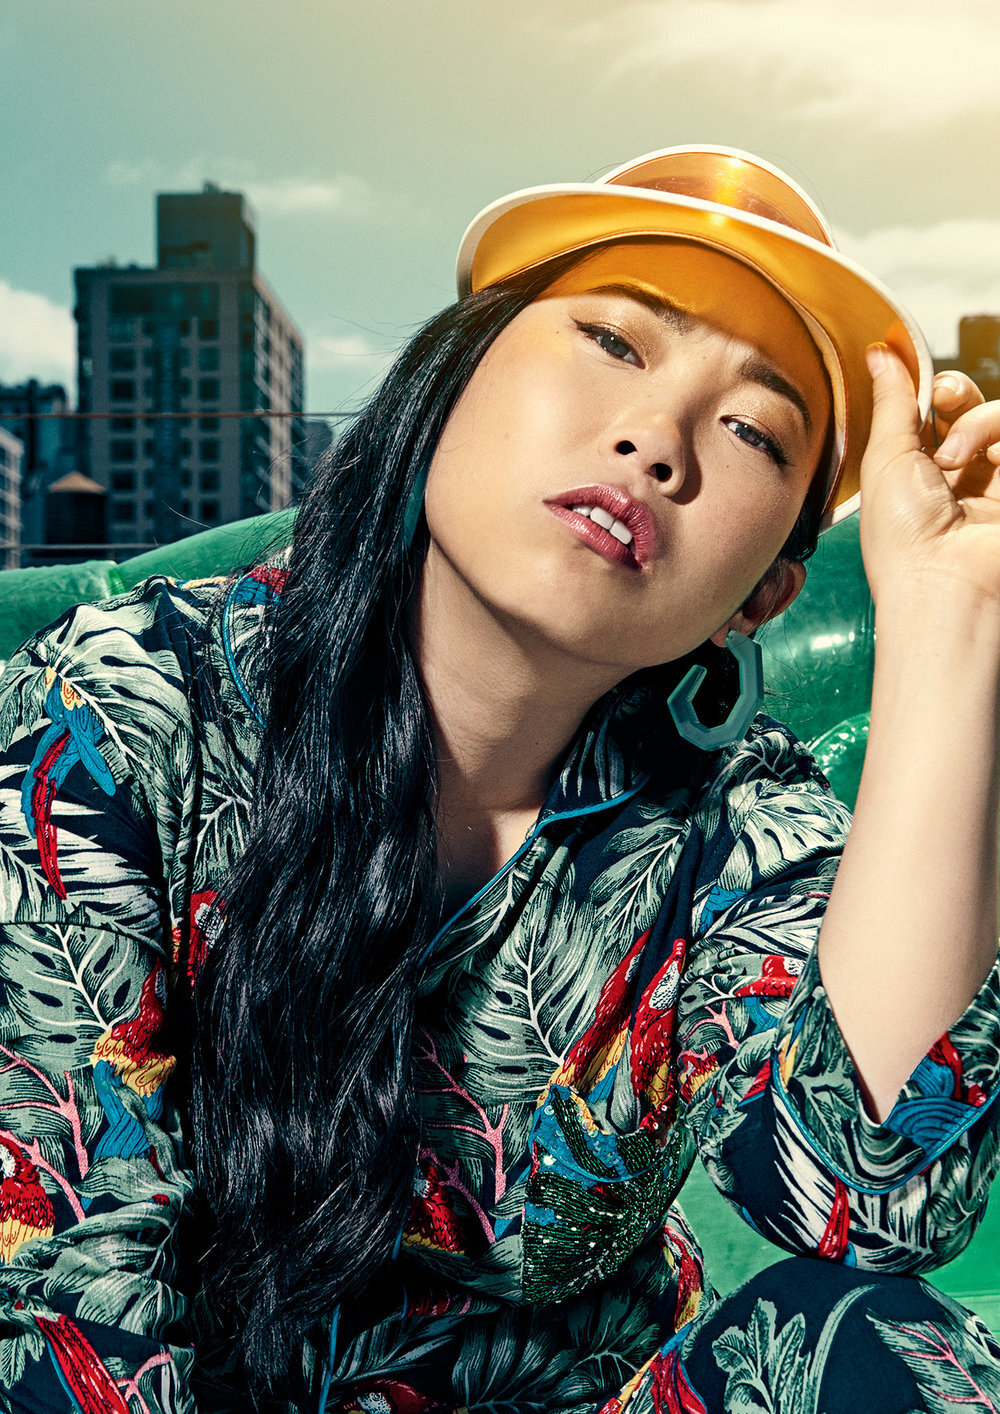   Awkwafina for  Time Out New York . Photography:  Guerin Blask;  Photo editor:  Ann Sullivan;  Prop styling:  Rosemary Gonzalez;  Styling:  Erica Cloud.   (Unpublished)   